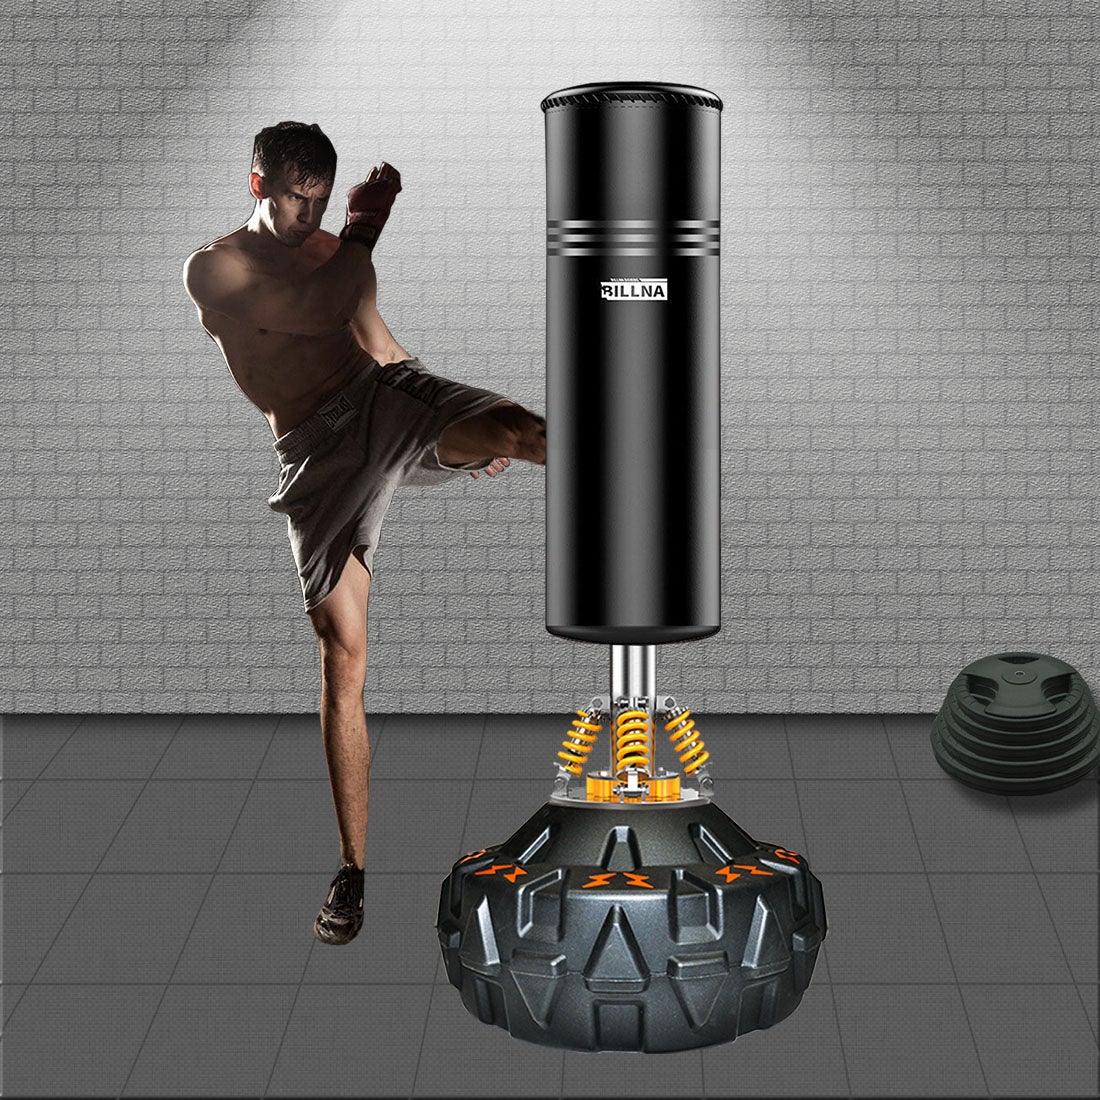 185cm Height - XLarge Free Standing Boxing Punching Bag Stand - Kick MMA Stand